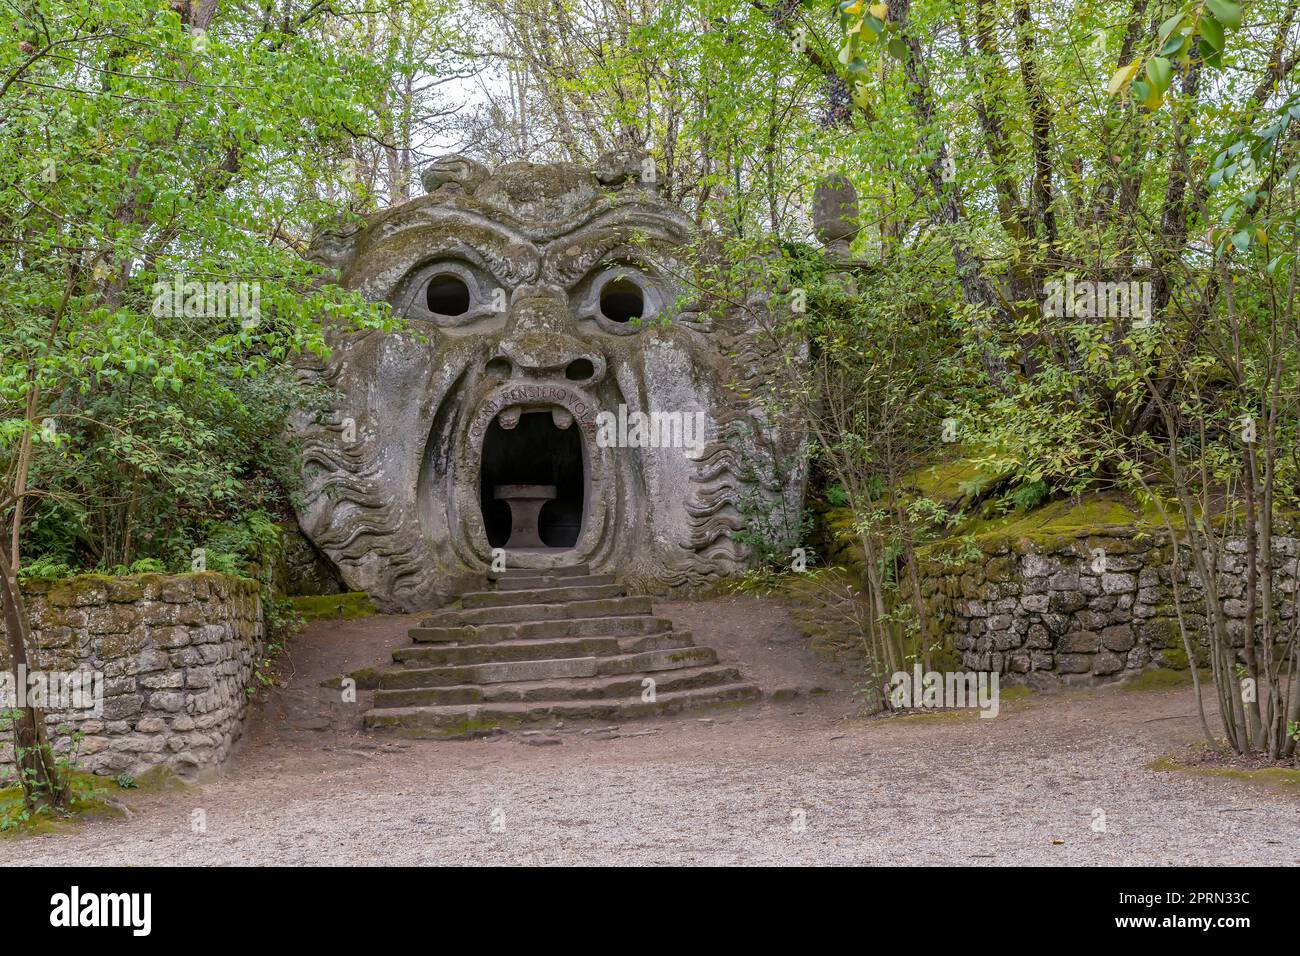 The ancient statue representing the ogre, in the park of monsters in Bomarzo, Italy (Translation: Every thought flies) Stock Photo